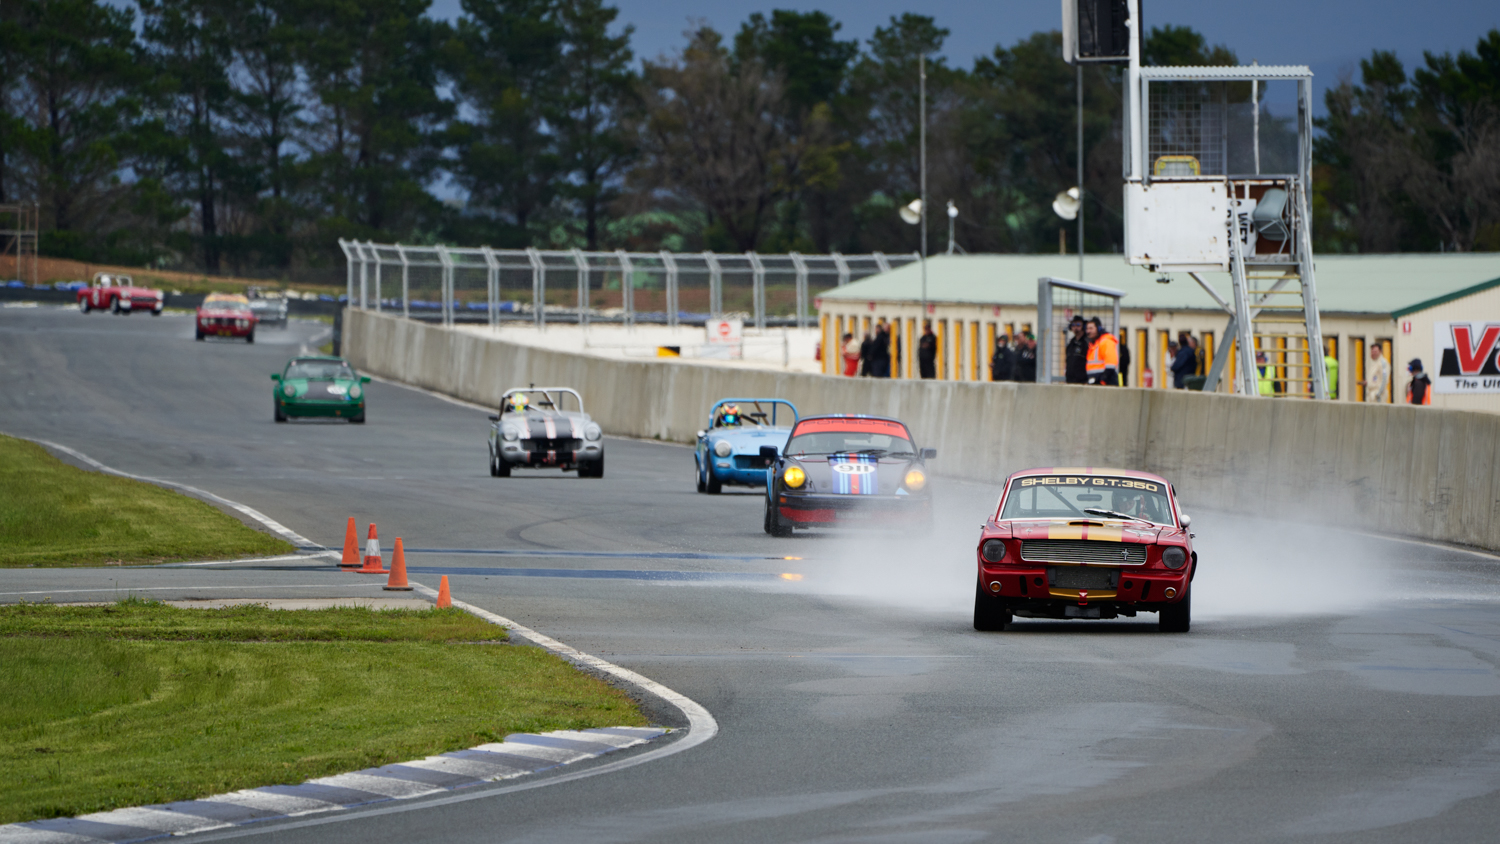 The Shelby GT350 of Terry Lawlor leading the GroupS pack. Seth Reinhardt Photo. Seth Reinhardt